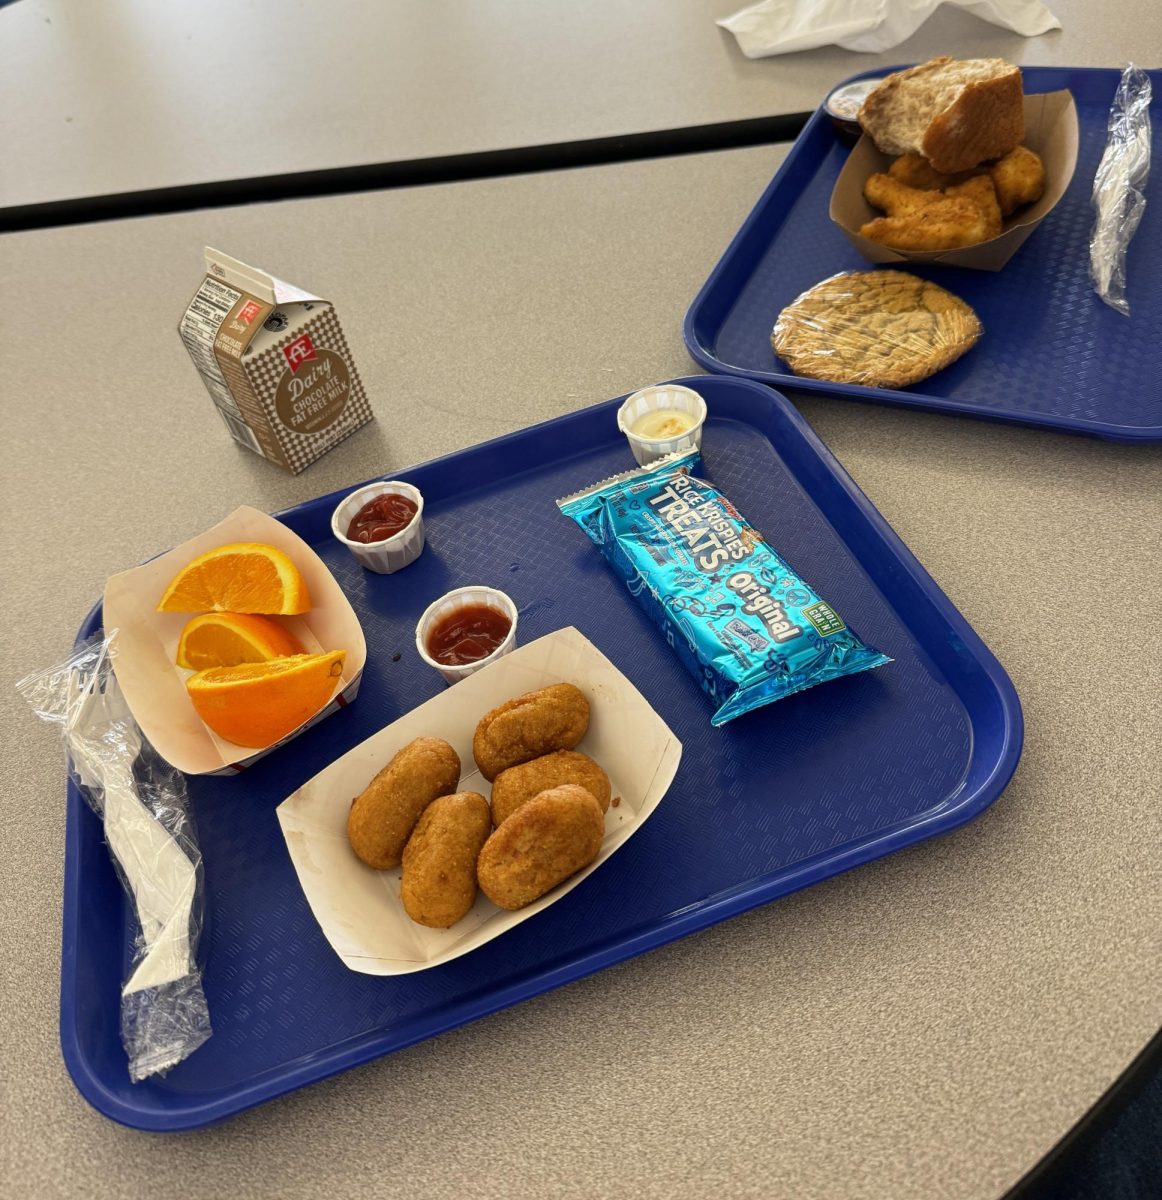 Two+high+school+lunches+display+the+typical+portion+sizes+available+to+students.